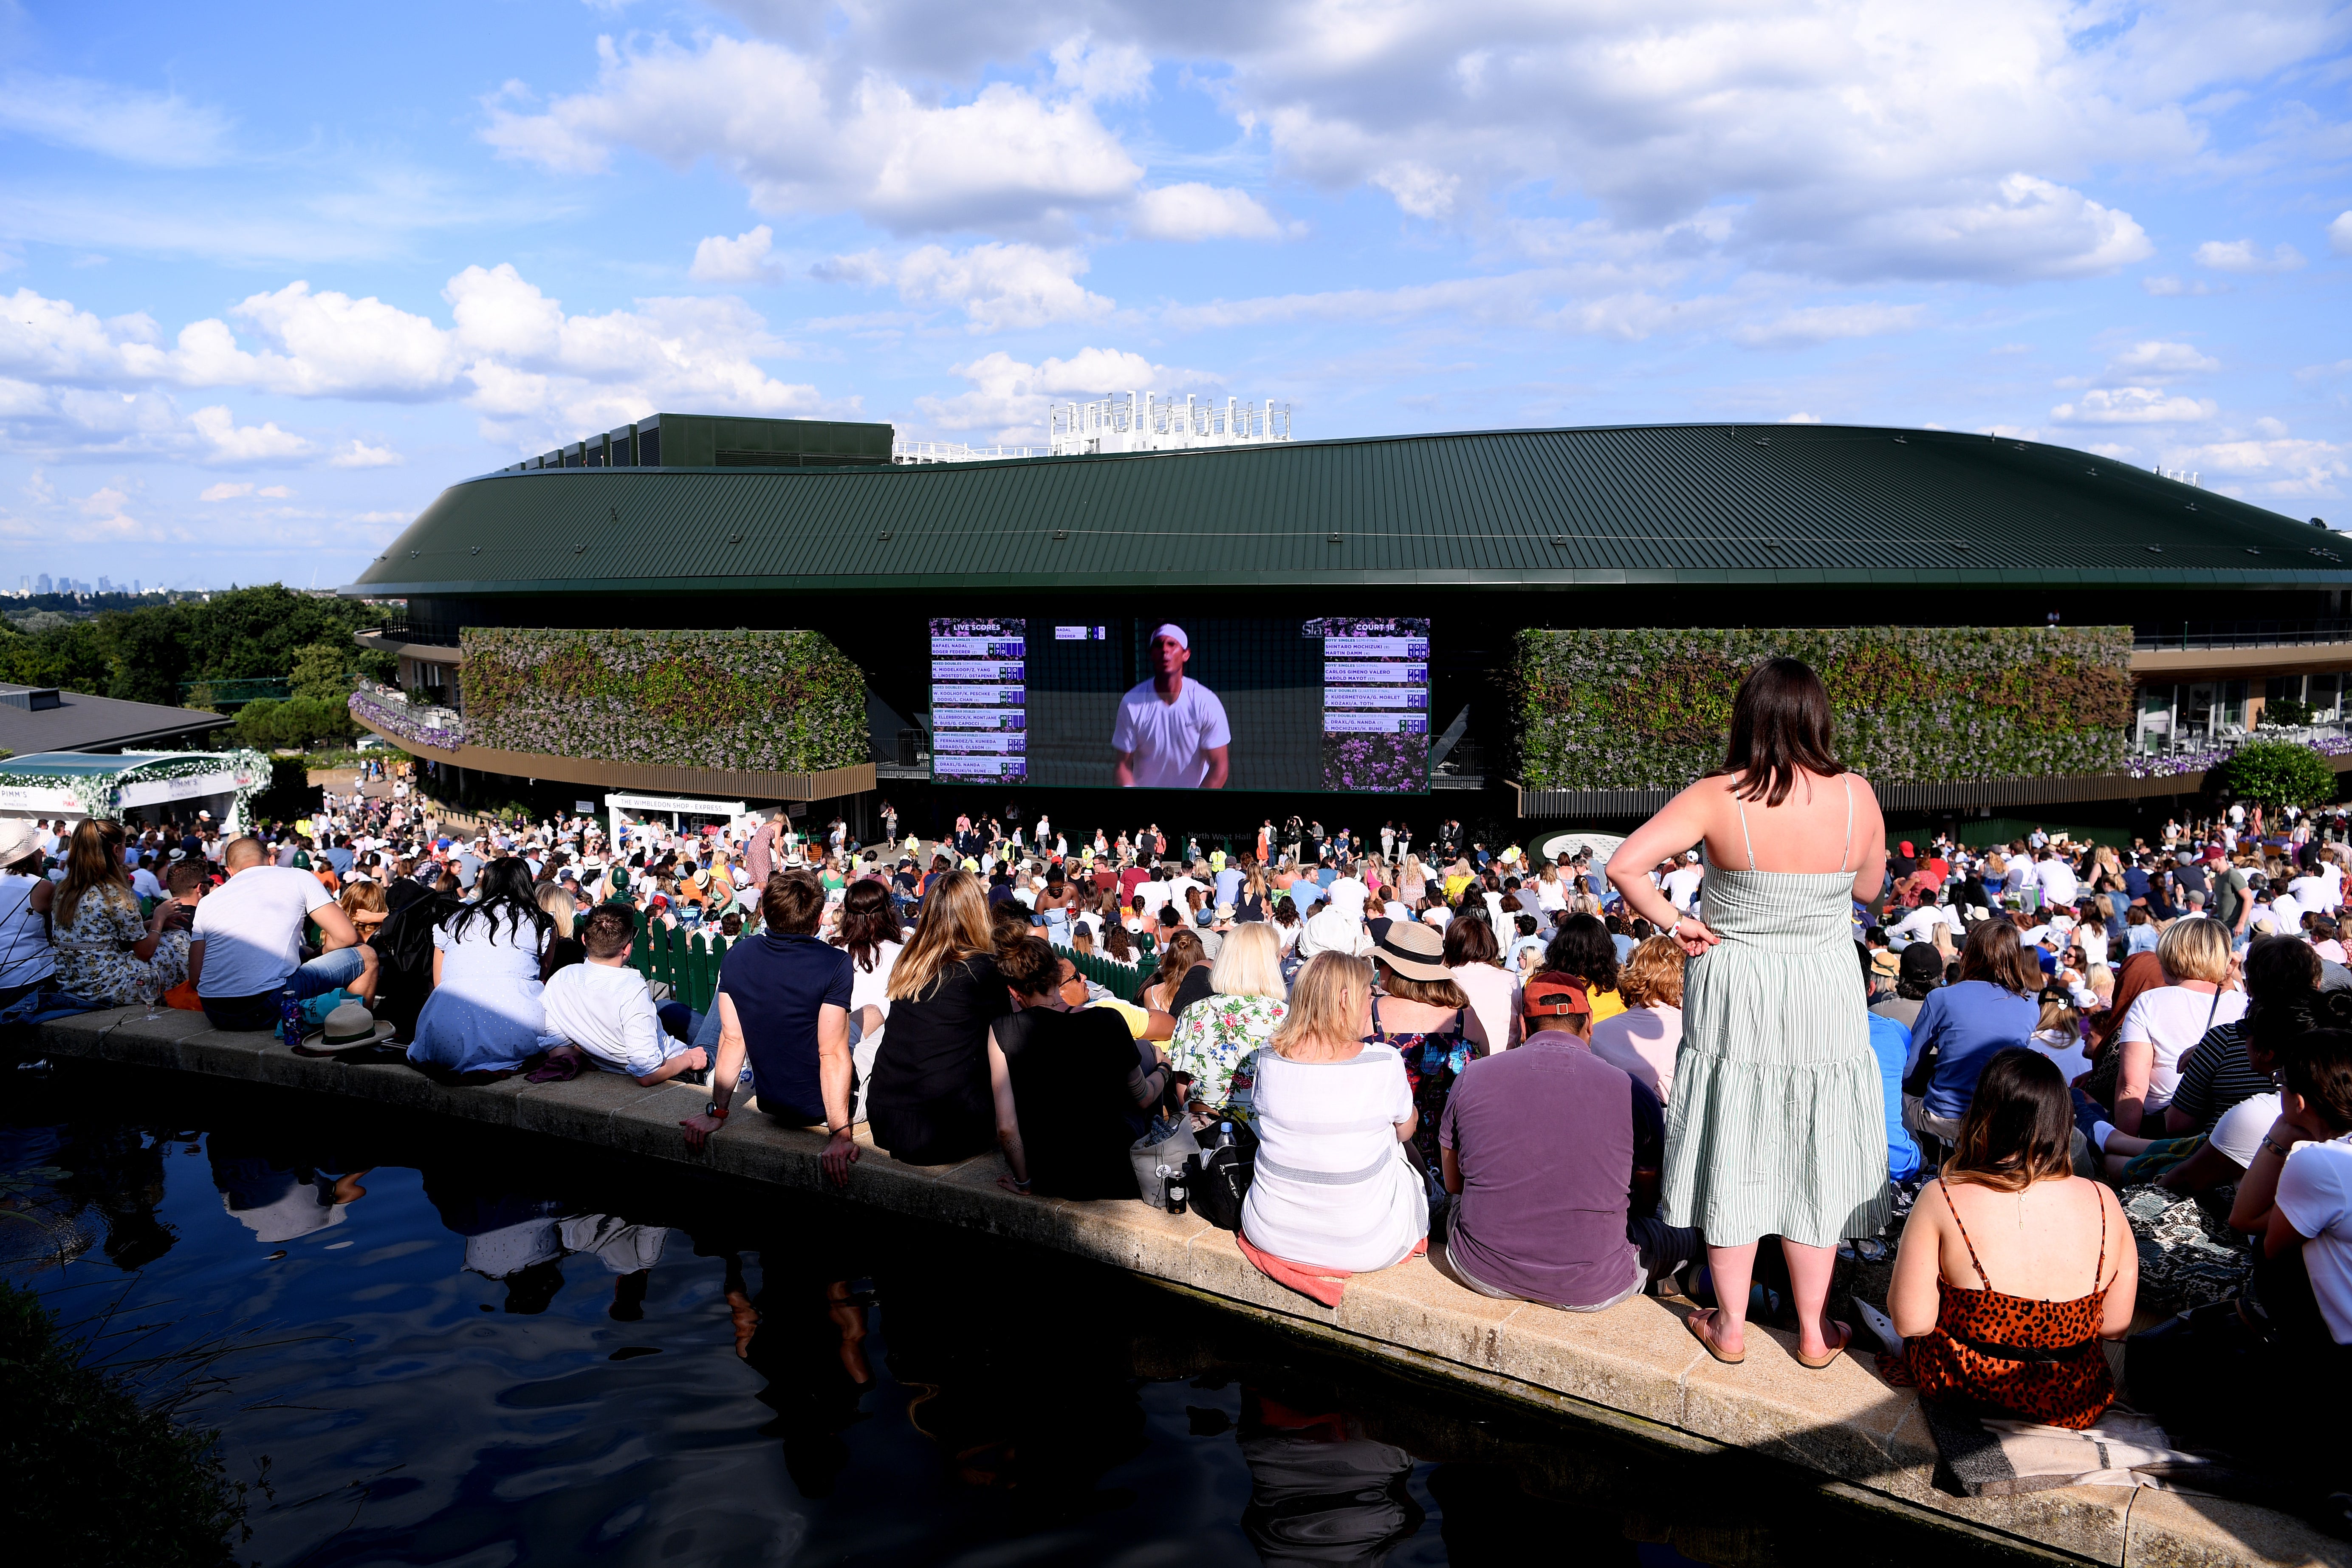 Wimbledon spectators are permitted to bring in one bottle of wine or champagne